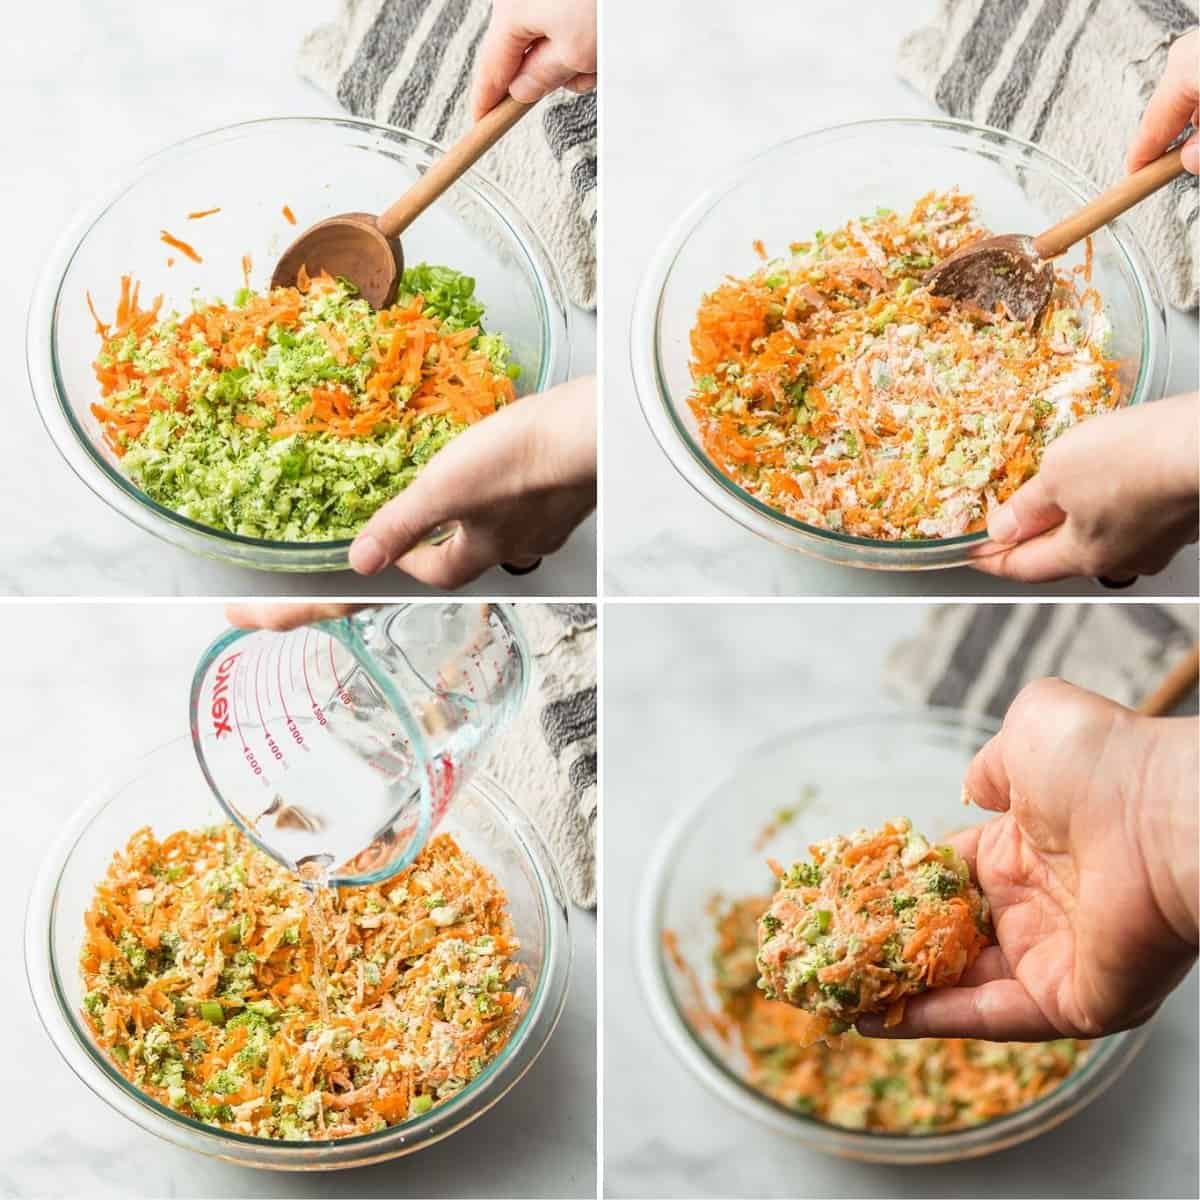 Collage showing 4 steps for mixing Vegetable Fritter batter.